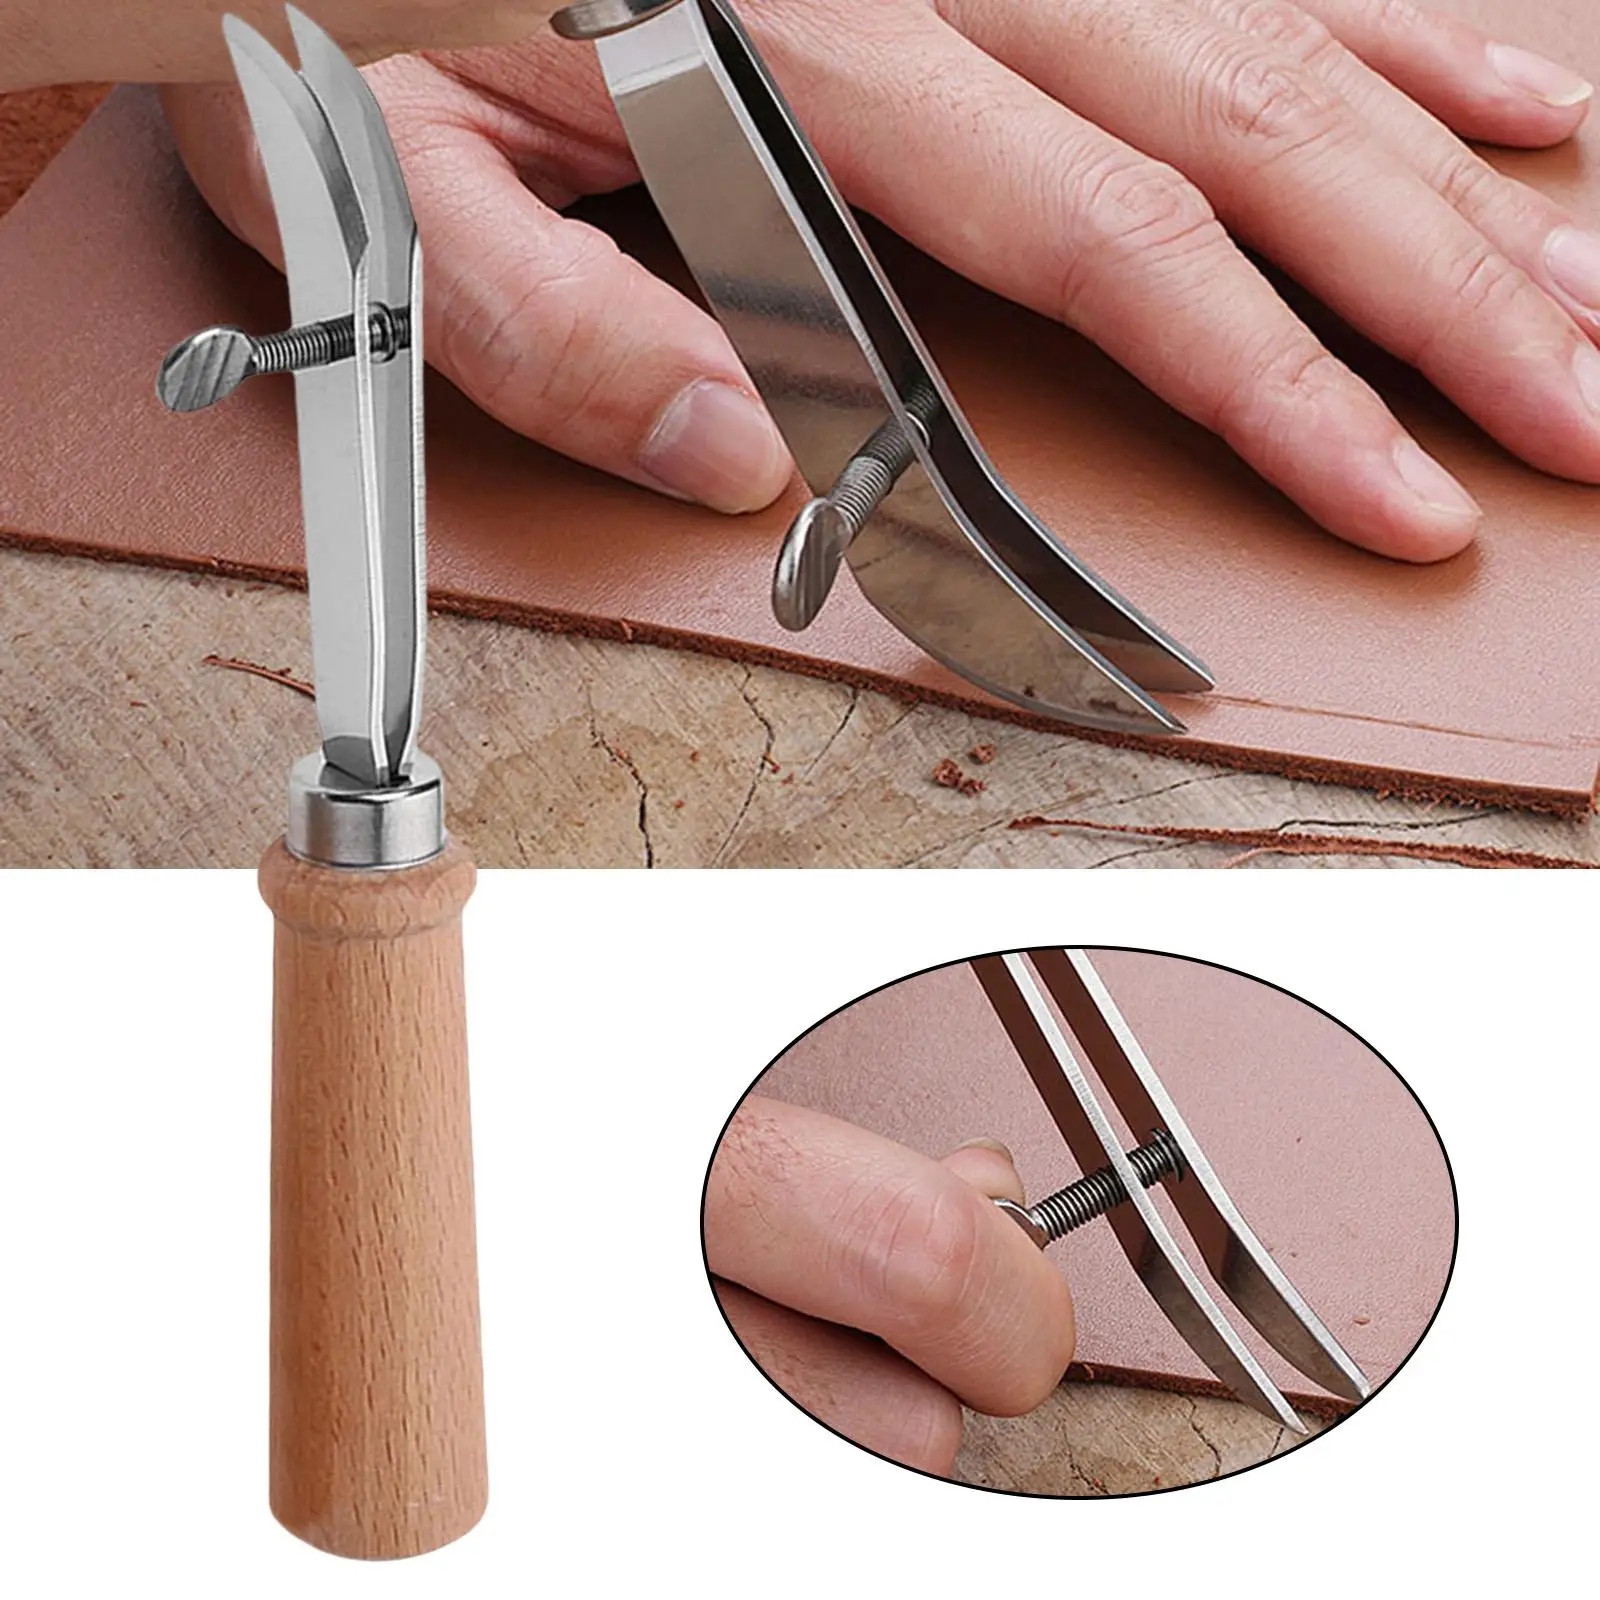 Durable Crimper Stainless Steel Leathercraft Stitching Edge Holder Outside Leather Edge Skiving Edger Creaser for Professionals